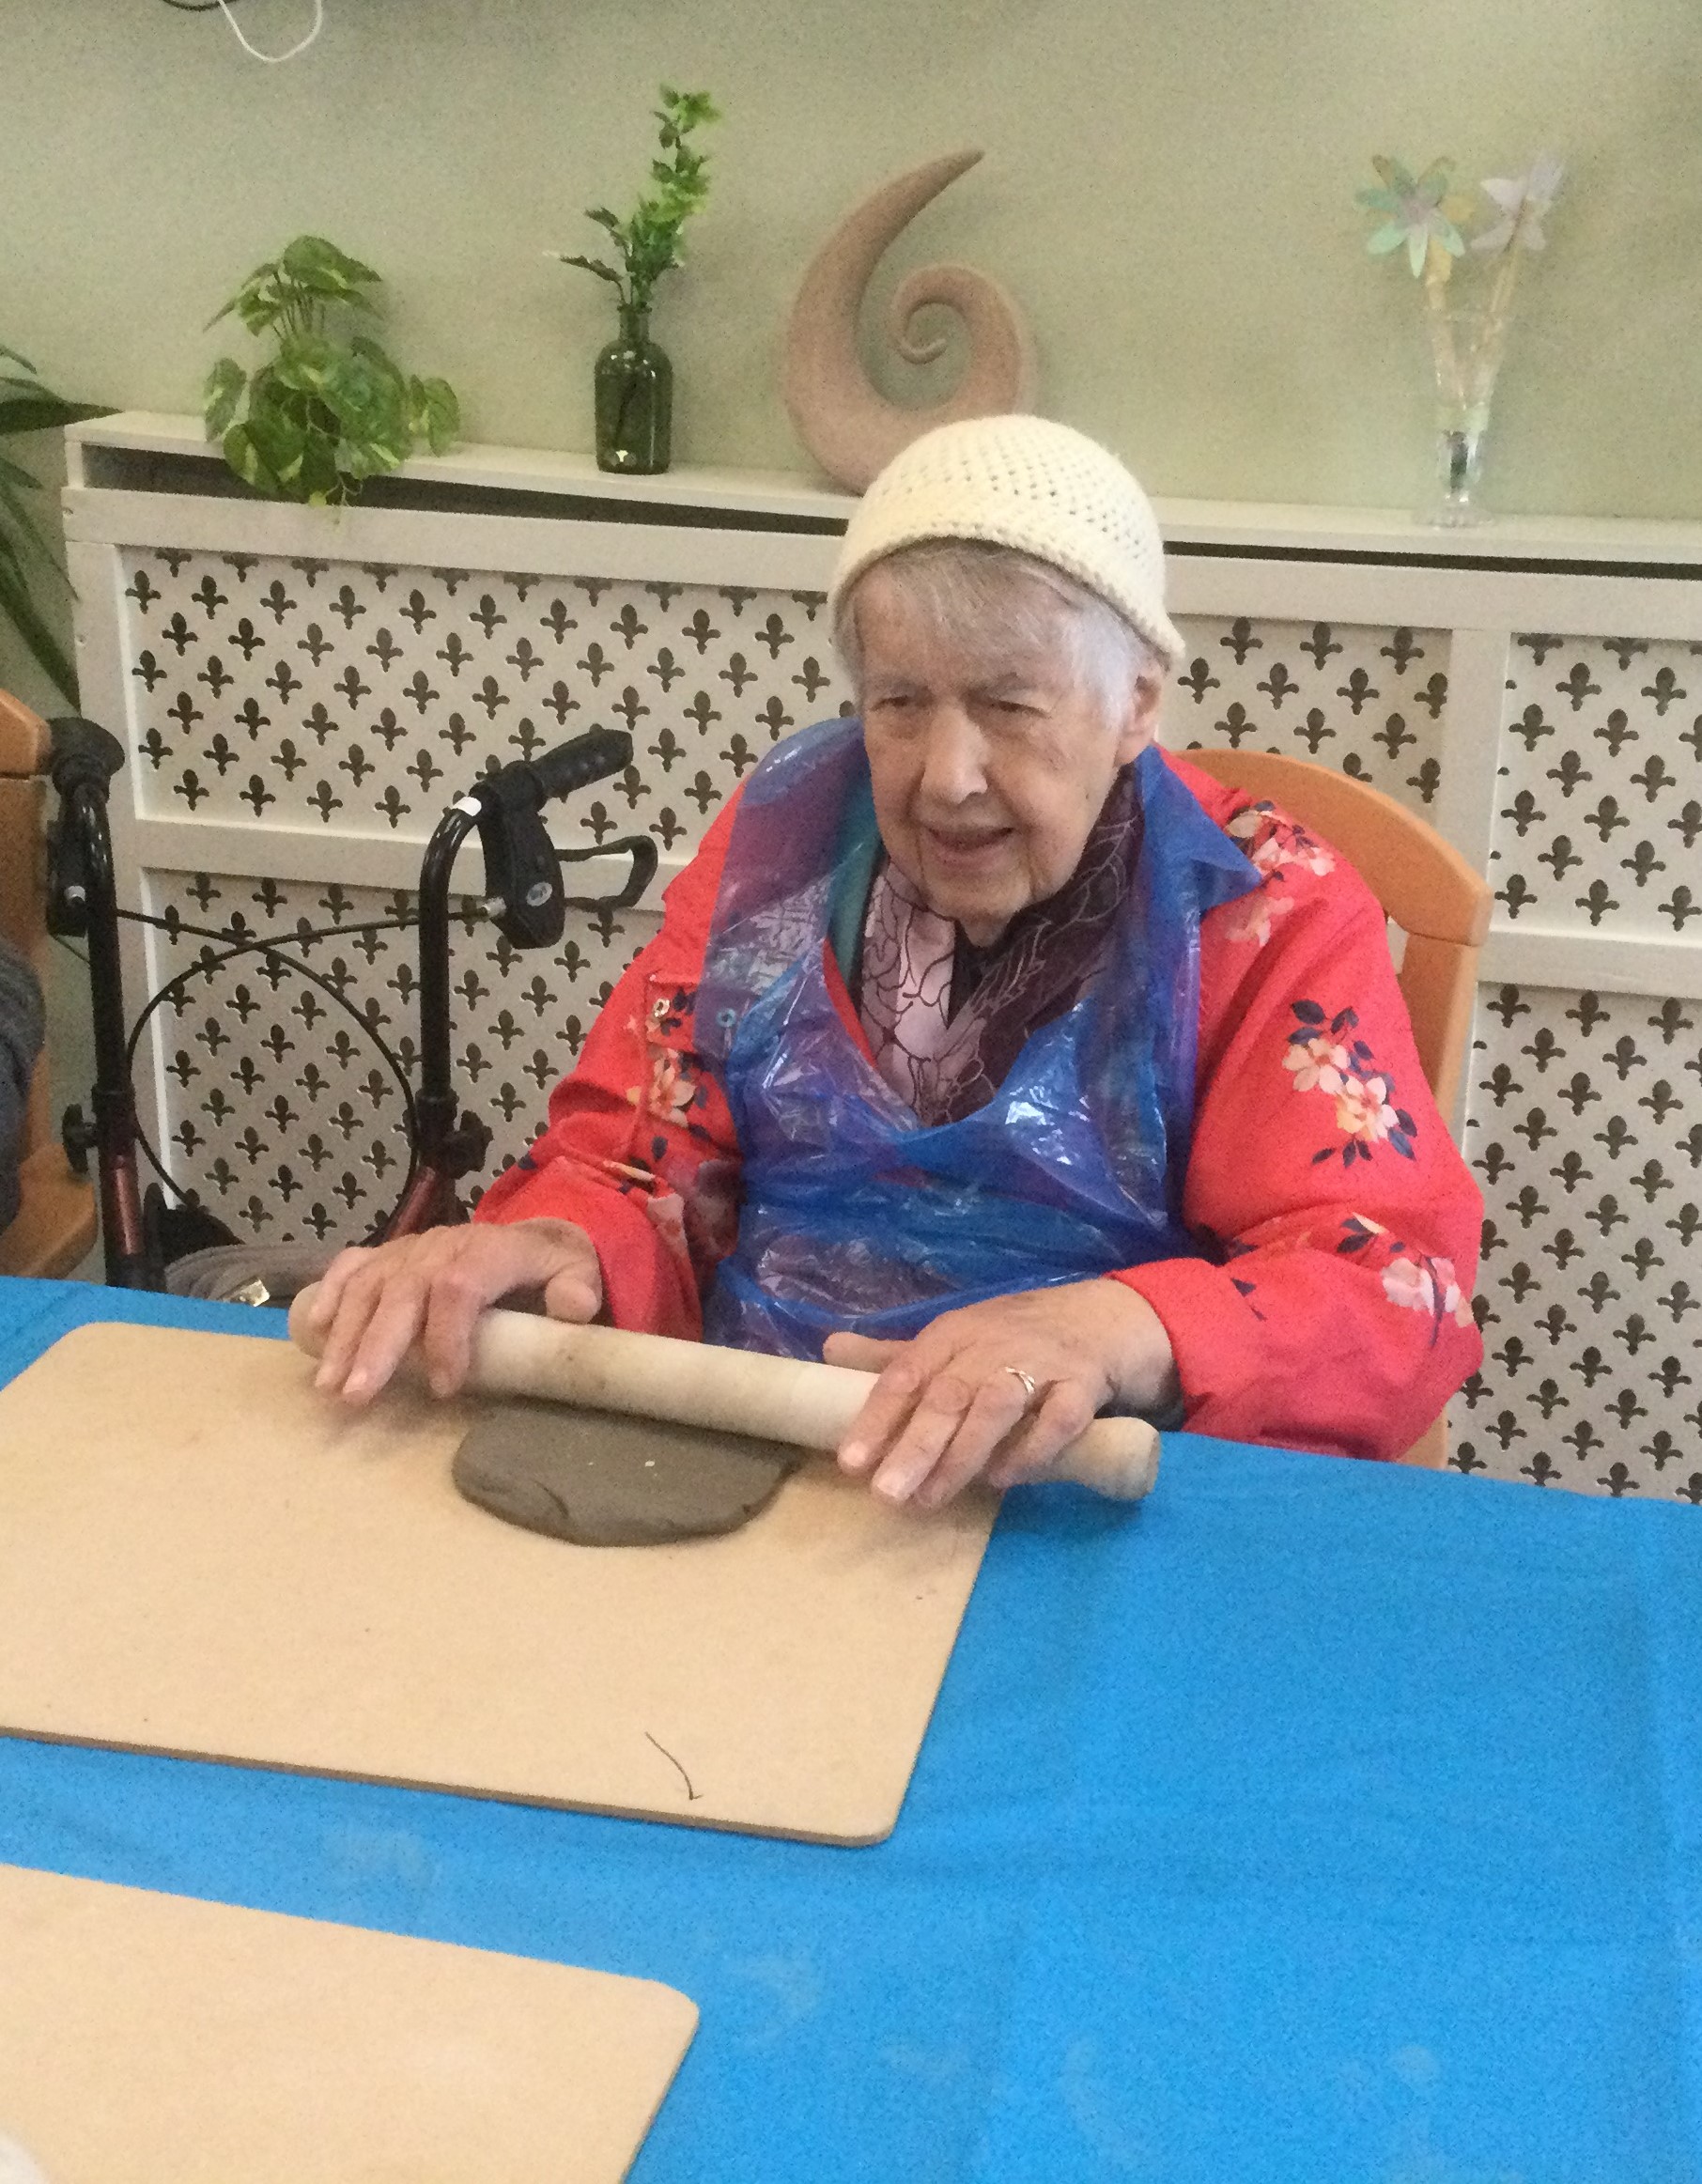 A woman smiles as she rolls out a piece of clay lump